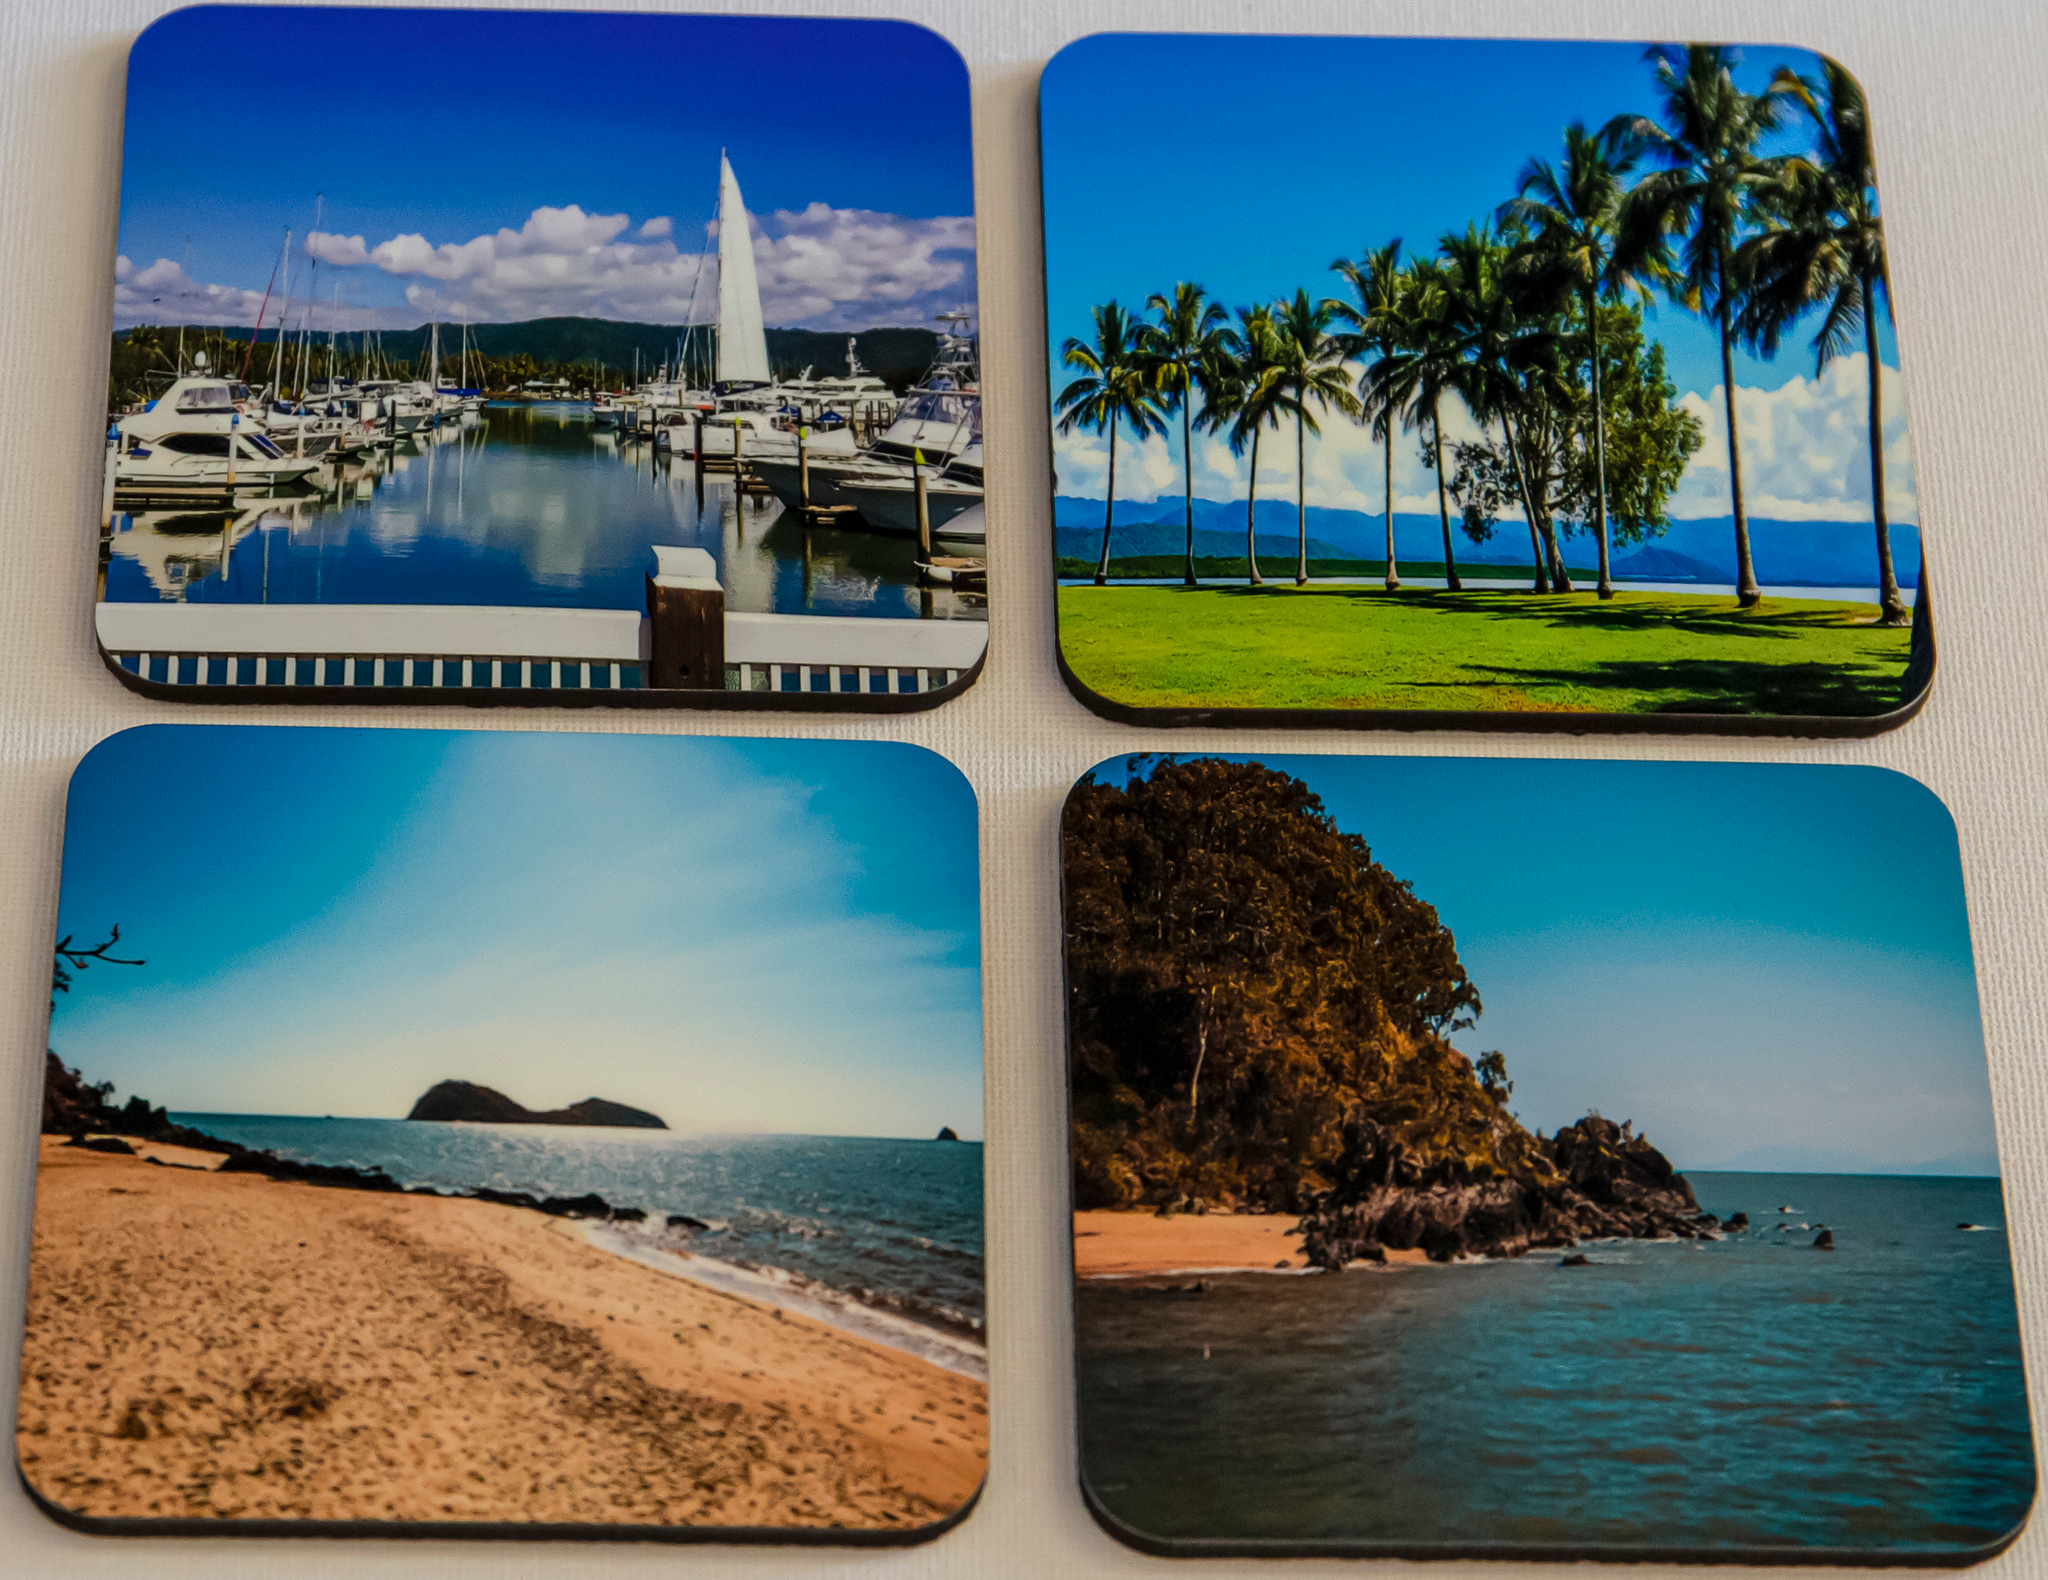 Buy Four (4) Coasters and get TWO (2) FREE